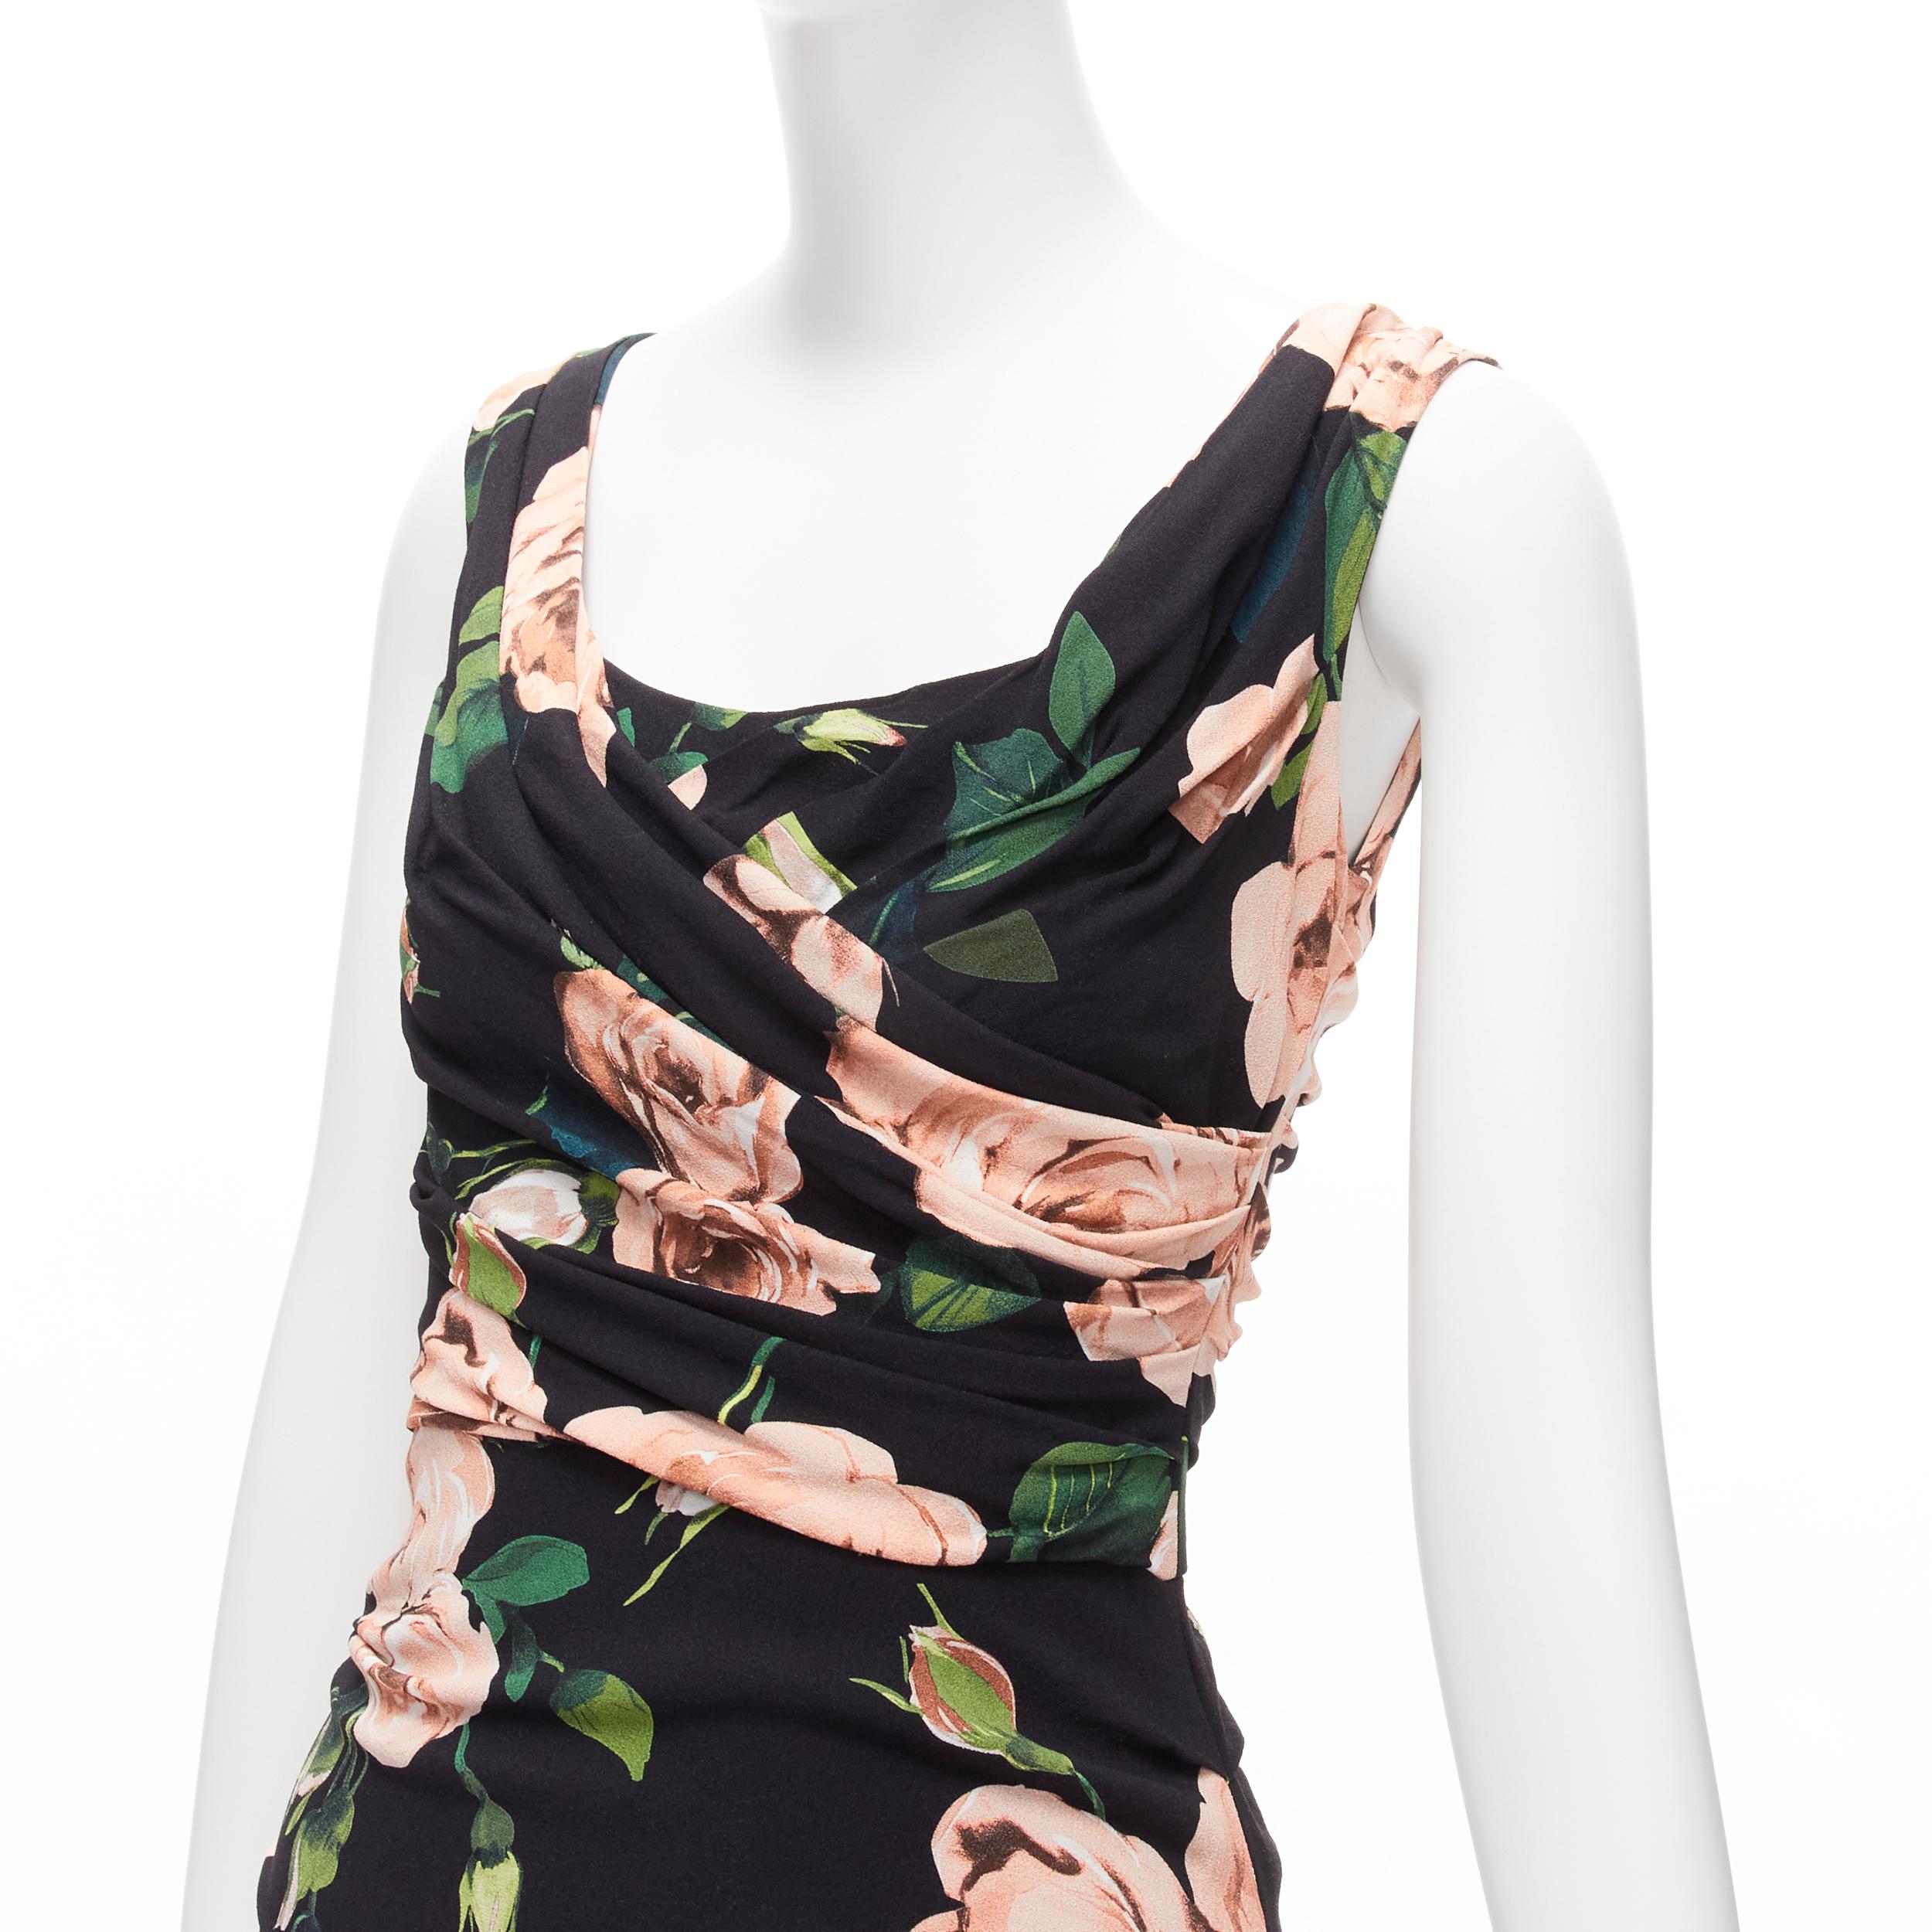 DOLCE GABBANA black pink rose print silk lined draped mid cocktaili dress IT38 XS
Reference: TGAS/D00262
Brand: Dolce Gabbana
Designer: Domenico Dolce and Stefano Gabbana
Material: Viscose
Color: Black, Pink
Pattern: Floral
Closure: Zip
Lining: